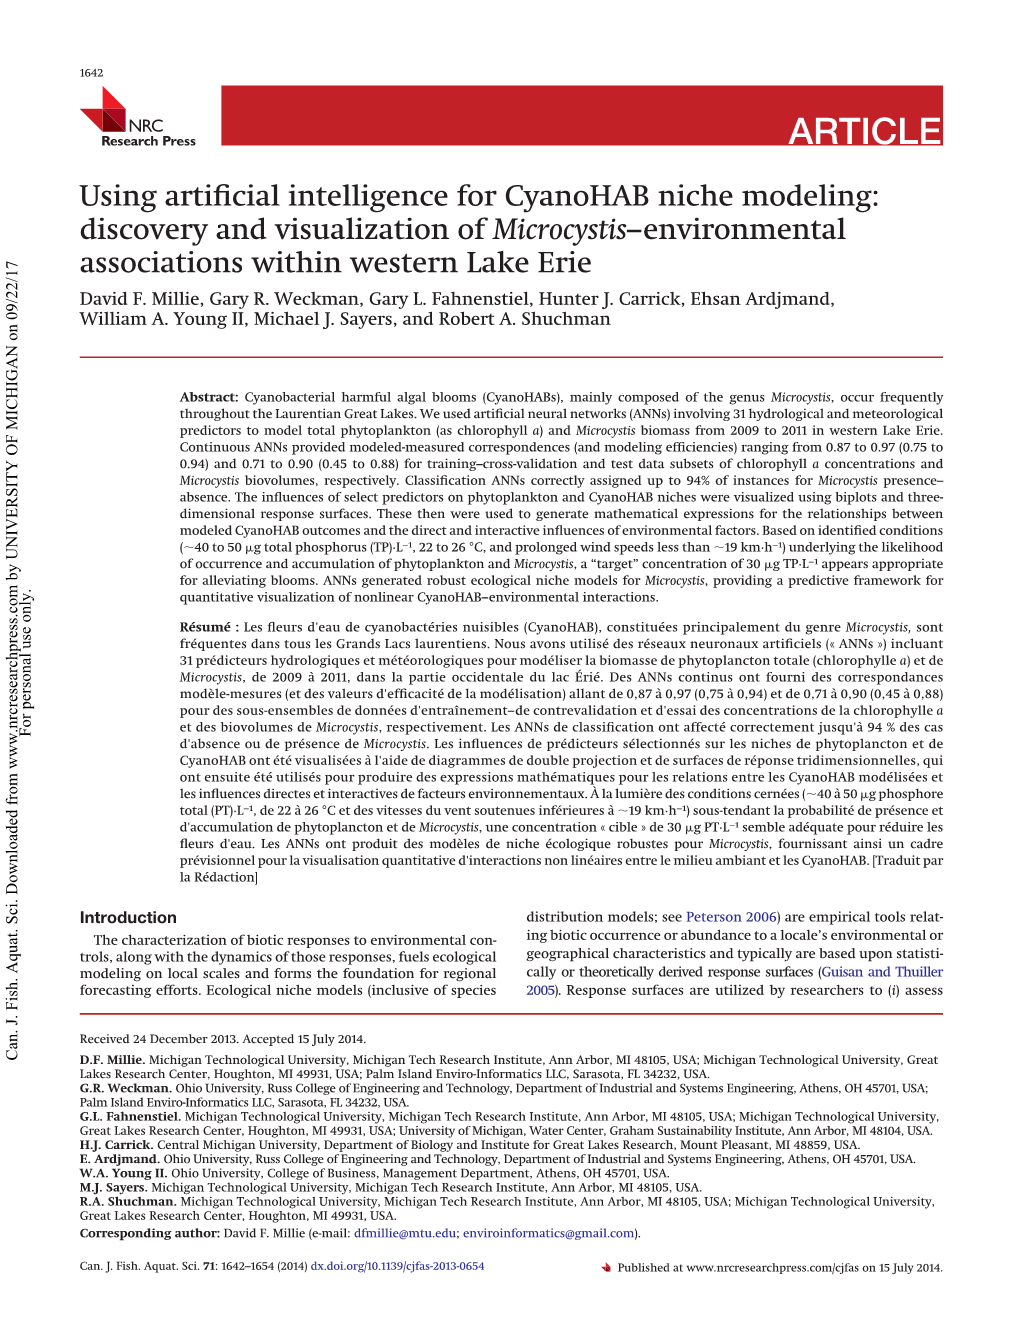 Using Artificial Intelligence for Cyanohab Niche Modeling